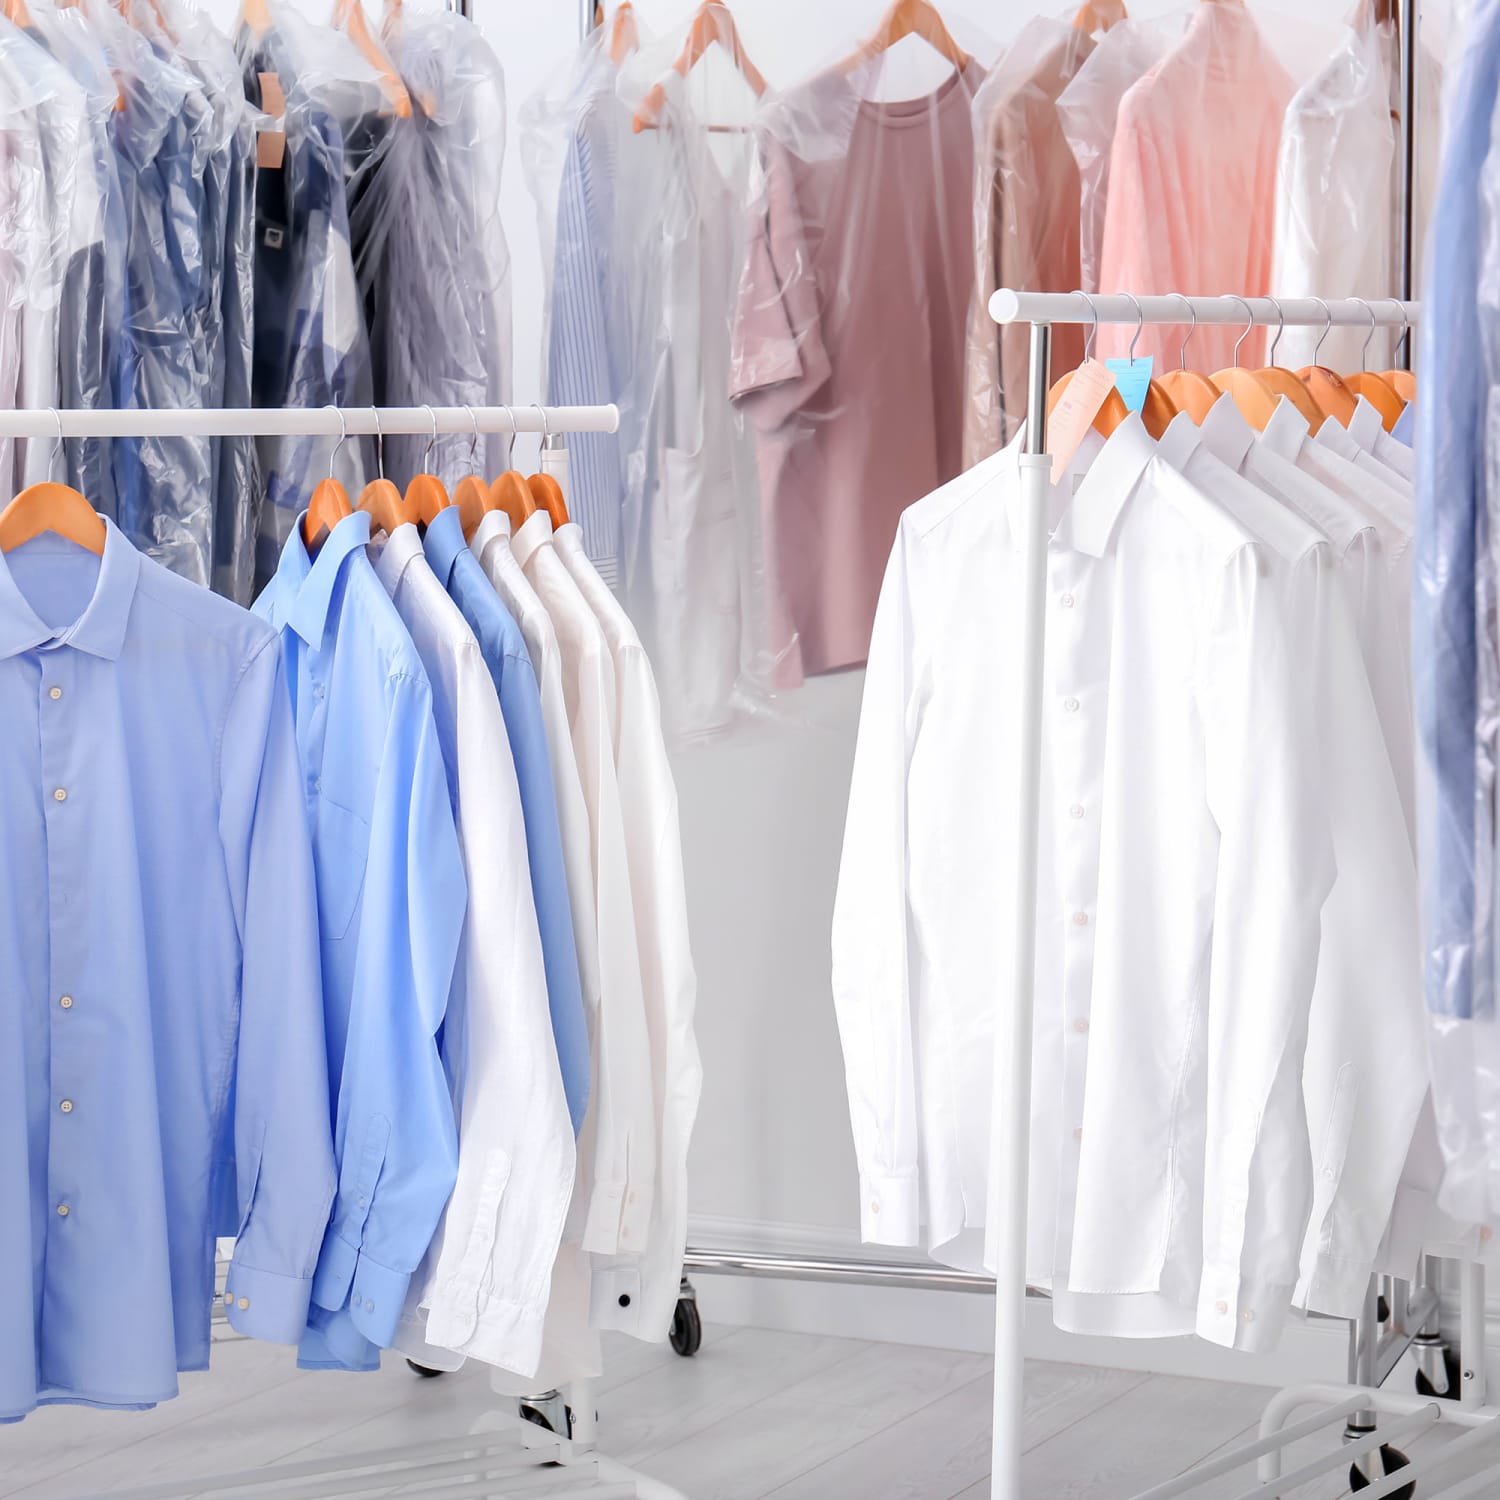 How to Properly Use Dry Cleaning Solvent